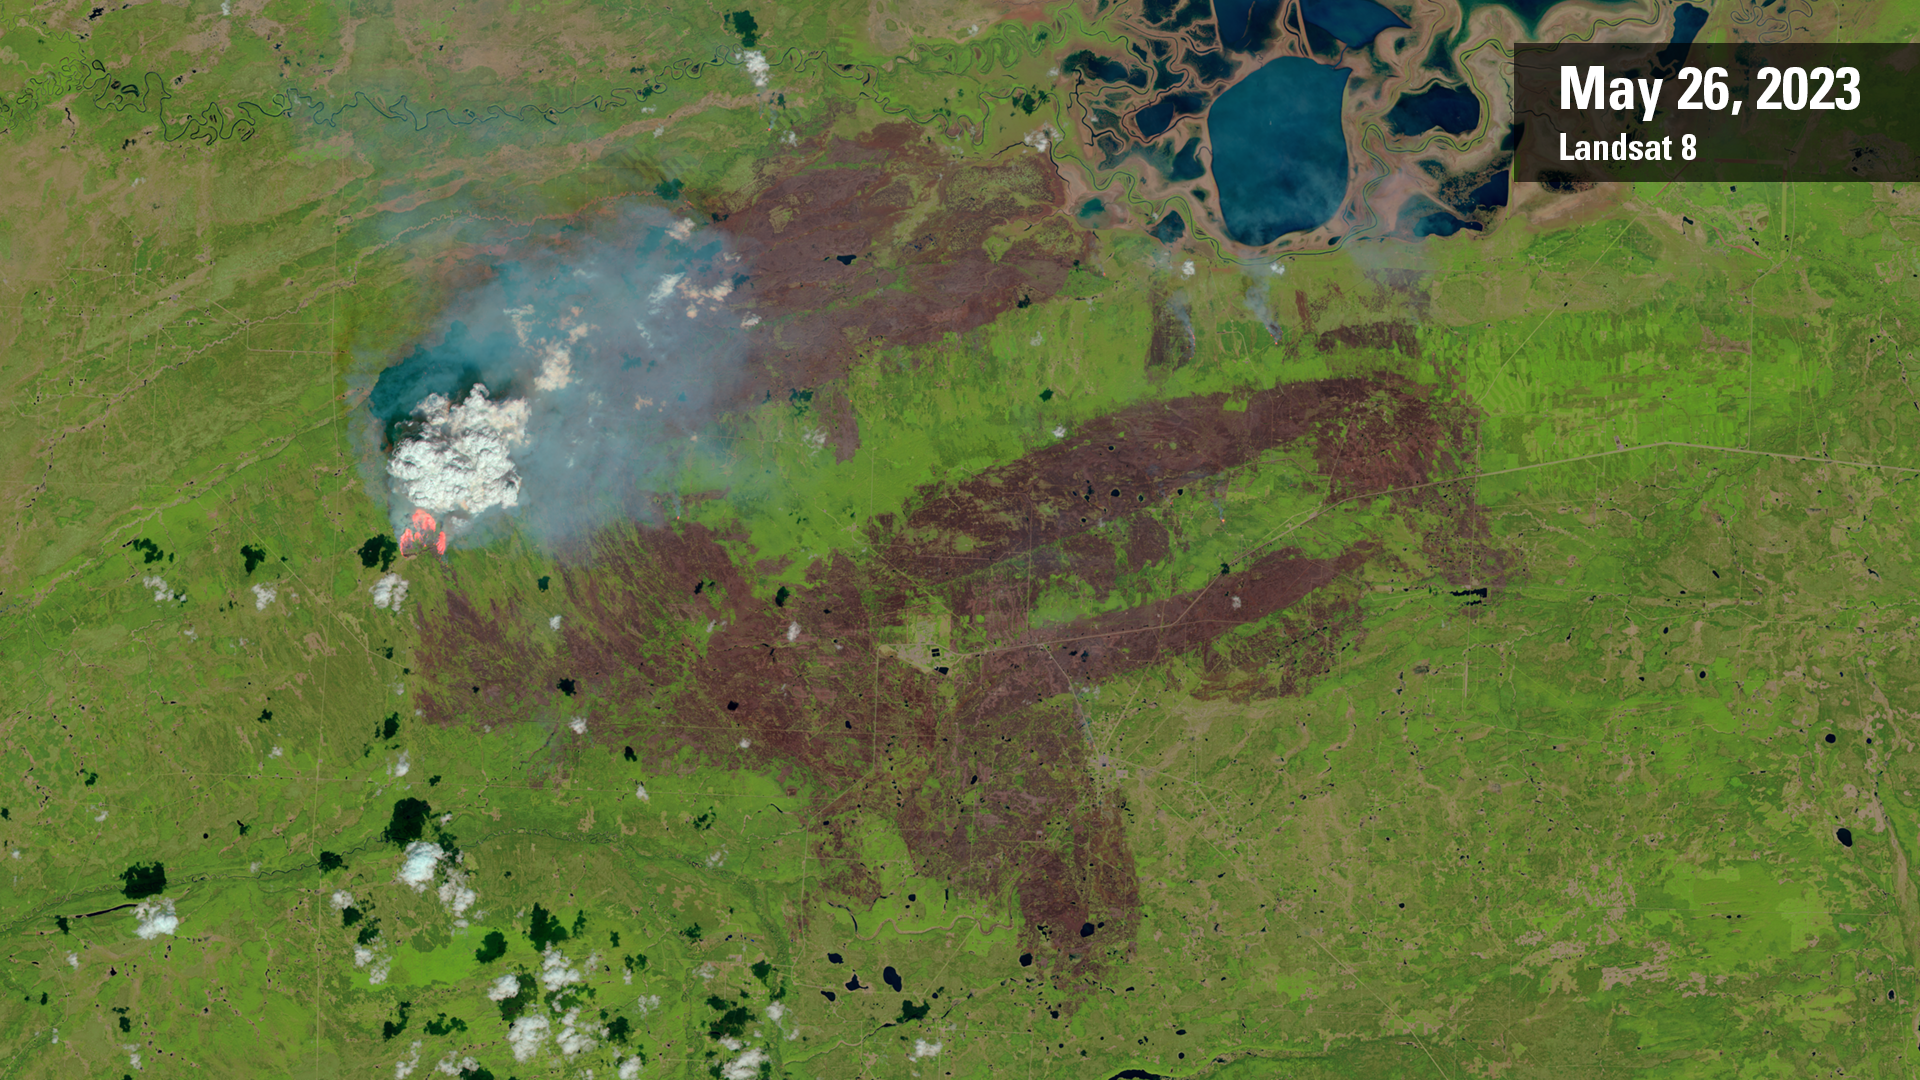 Fires in Canada, May 2023 after